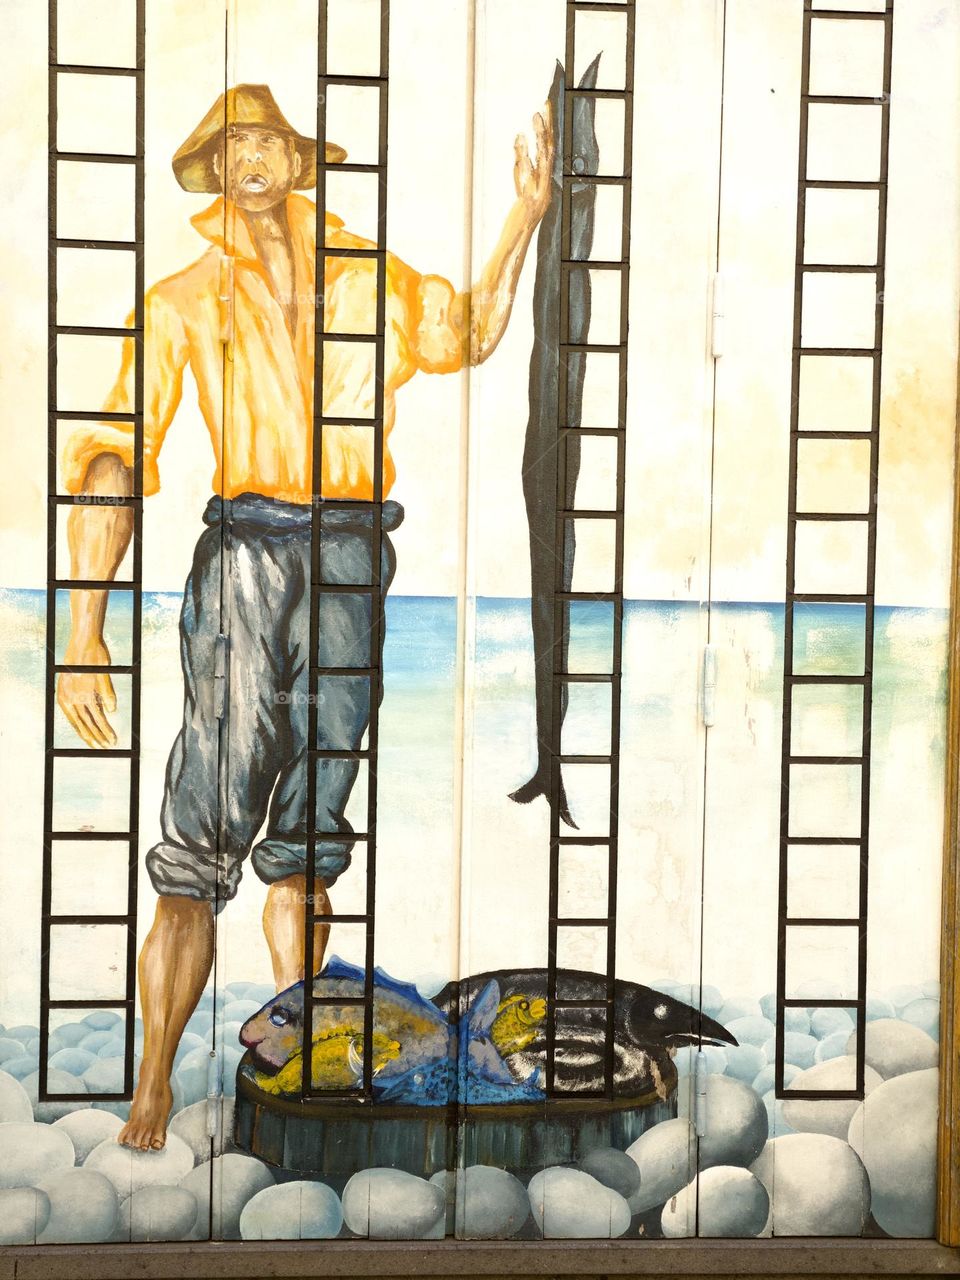 A painting depicting life on Madeira, a fisherman catching the long back scabbard fish!